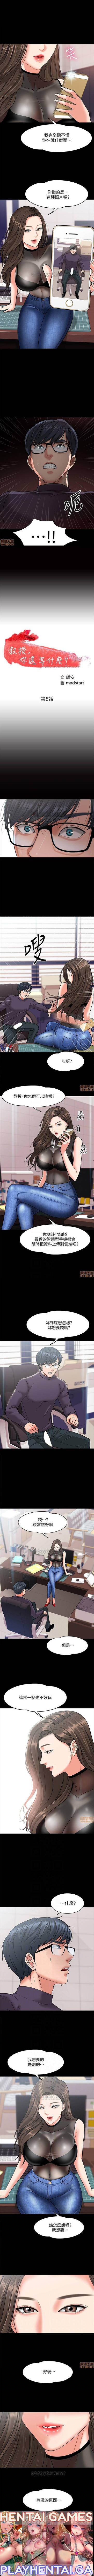 Big Black Cock PROFESSOR, ARE YOU JUST GOING TO LOOK AT ME? | DESIRE SWAMP | 教授，你還等什麼? Ch. 5 [Chinese] Manhwa Butthole - Page 2